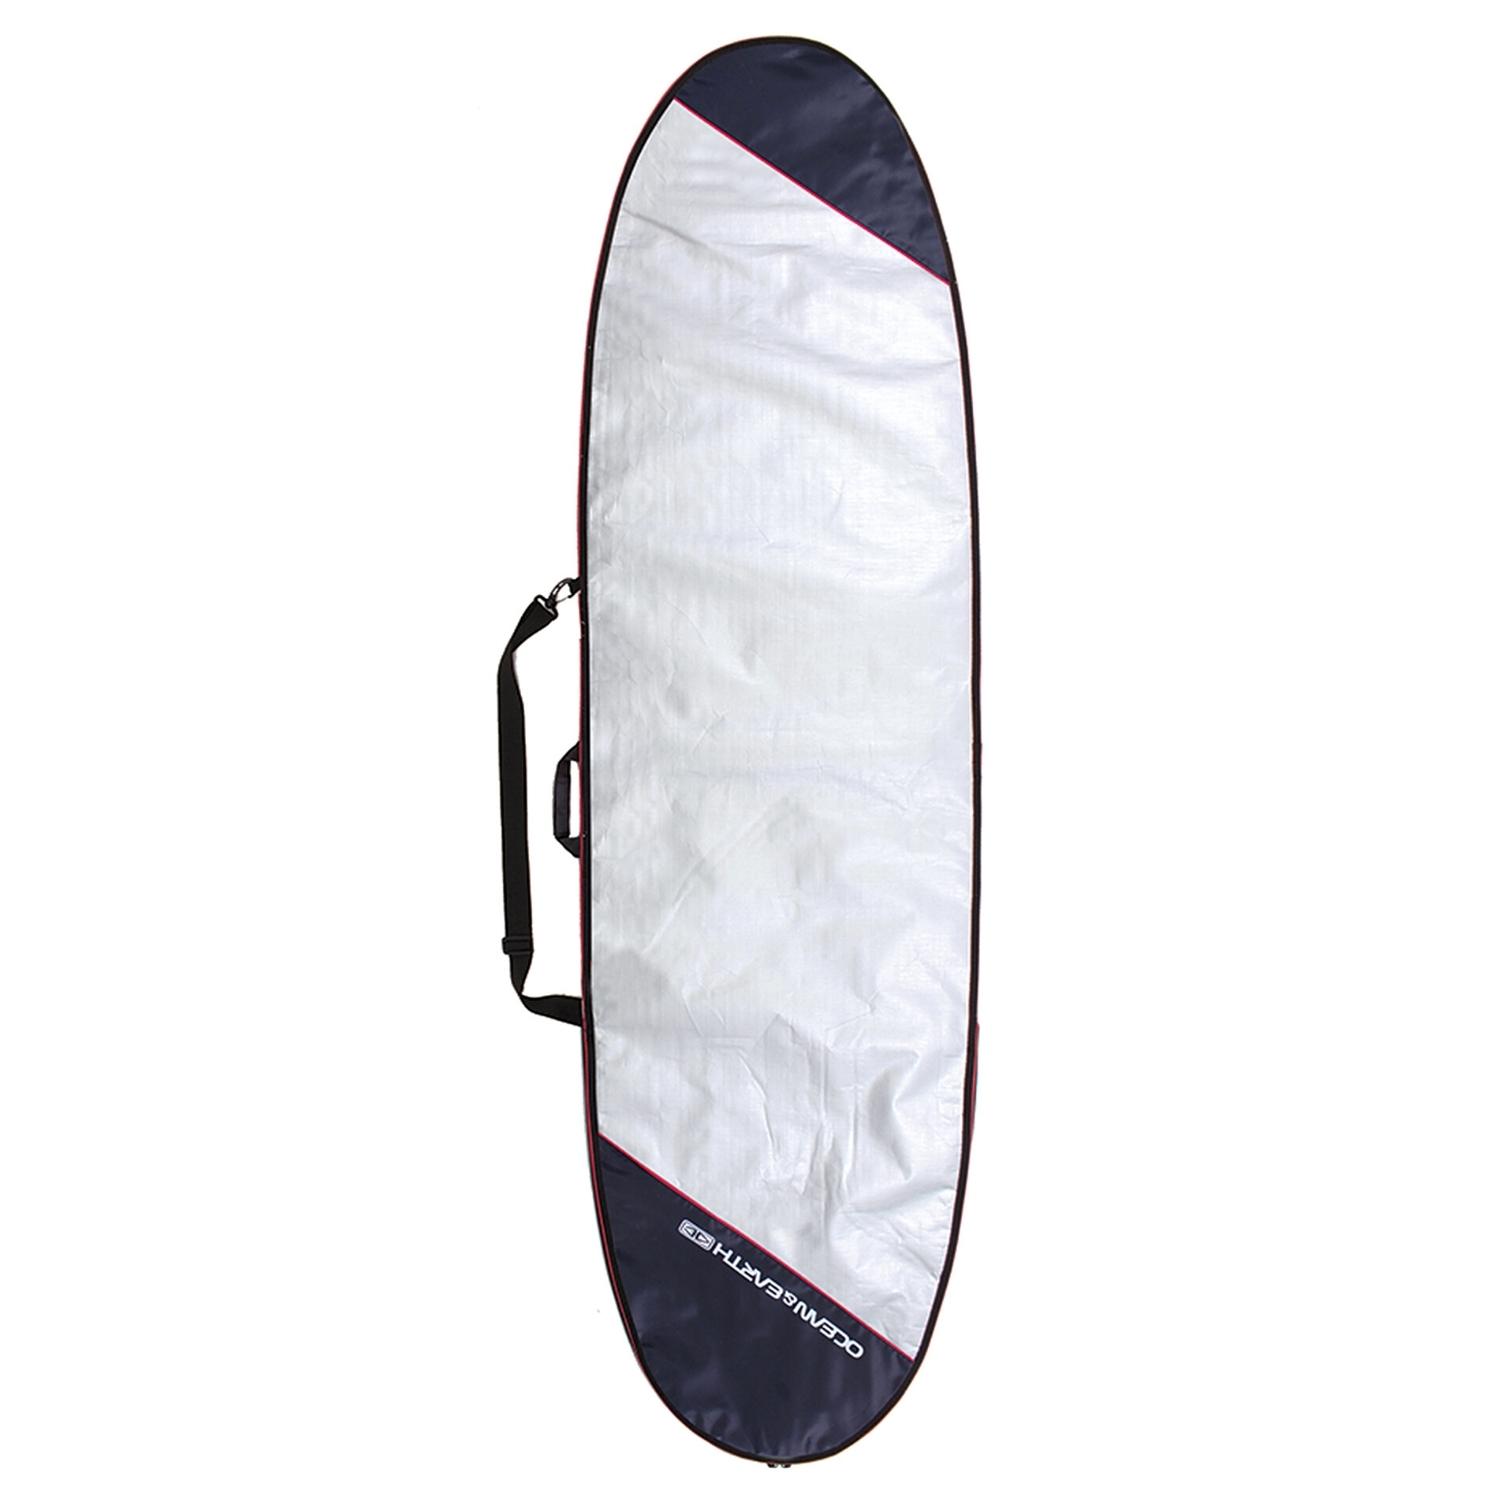 Ocean And Earth 9'6 Barry Longboard Surfboard Bag Cover - Silver/Red - Surfboard Day Runner Bag/Cover by Ocean and Earth 9ft 6